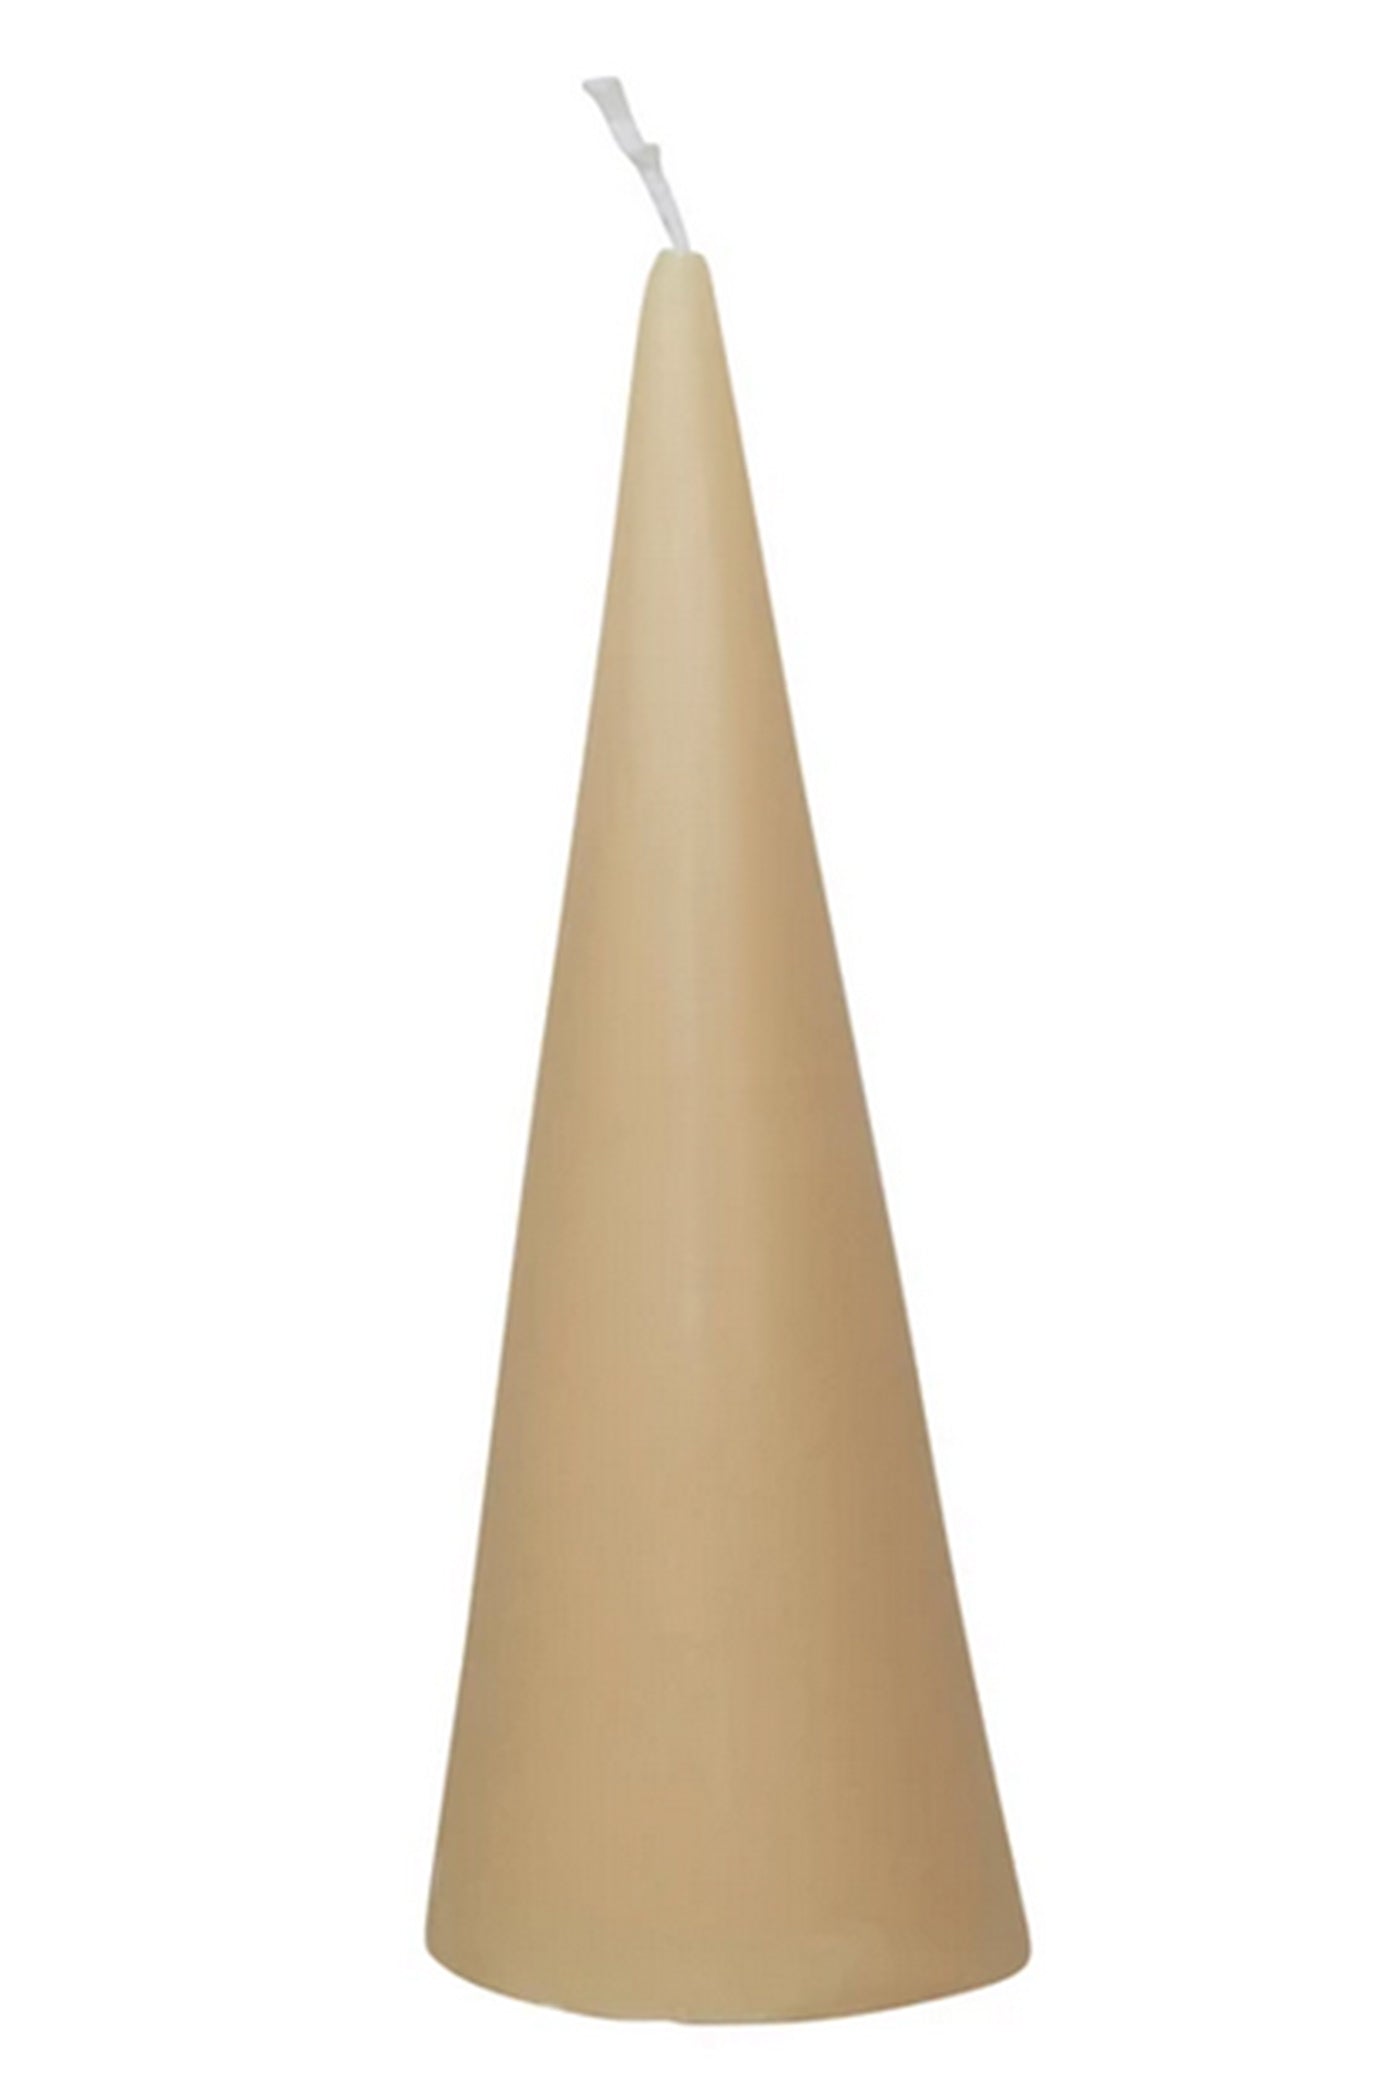 Tall Unscented Tree Shaped Candle- Cream